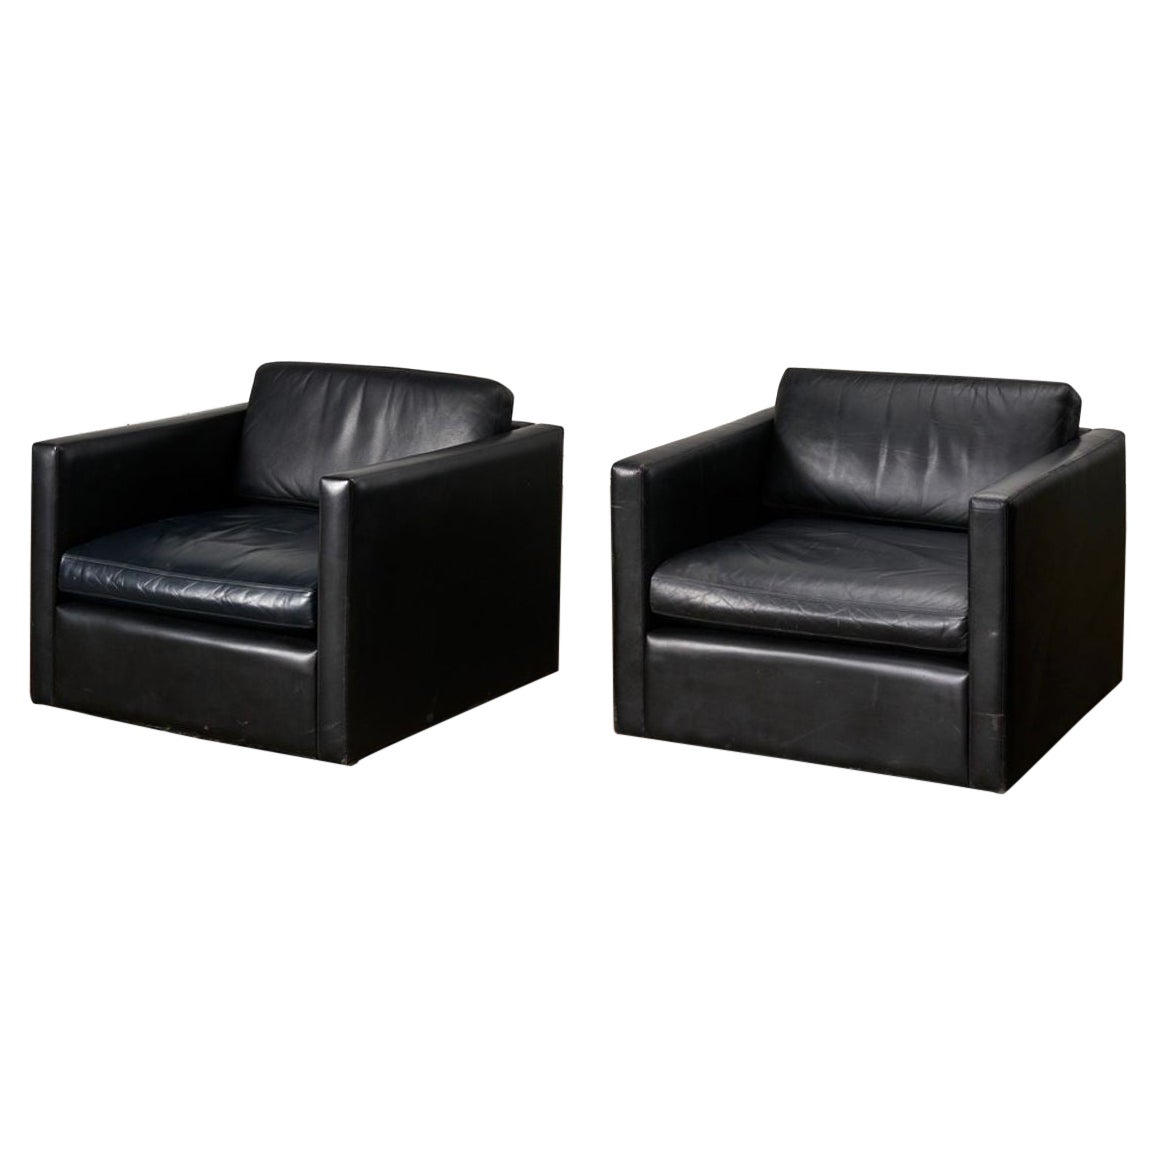 Pair Knoll Pfister Black Leather Lounge Chairs, 1980 For Sale